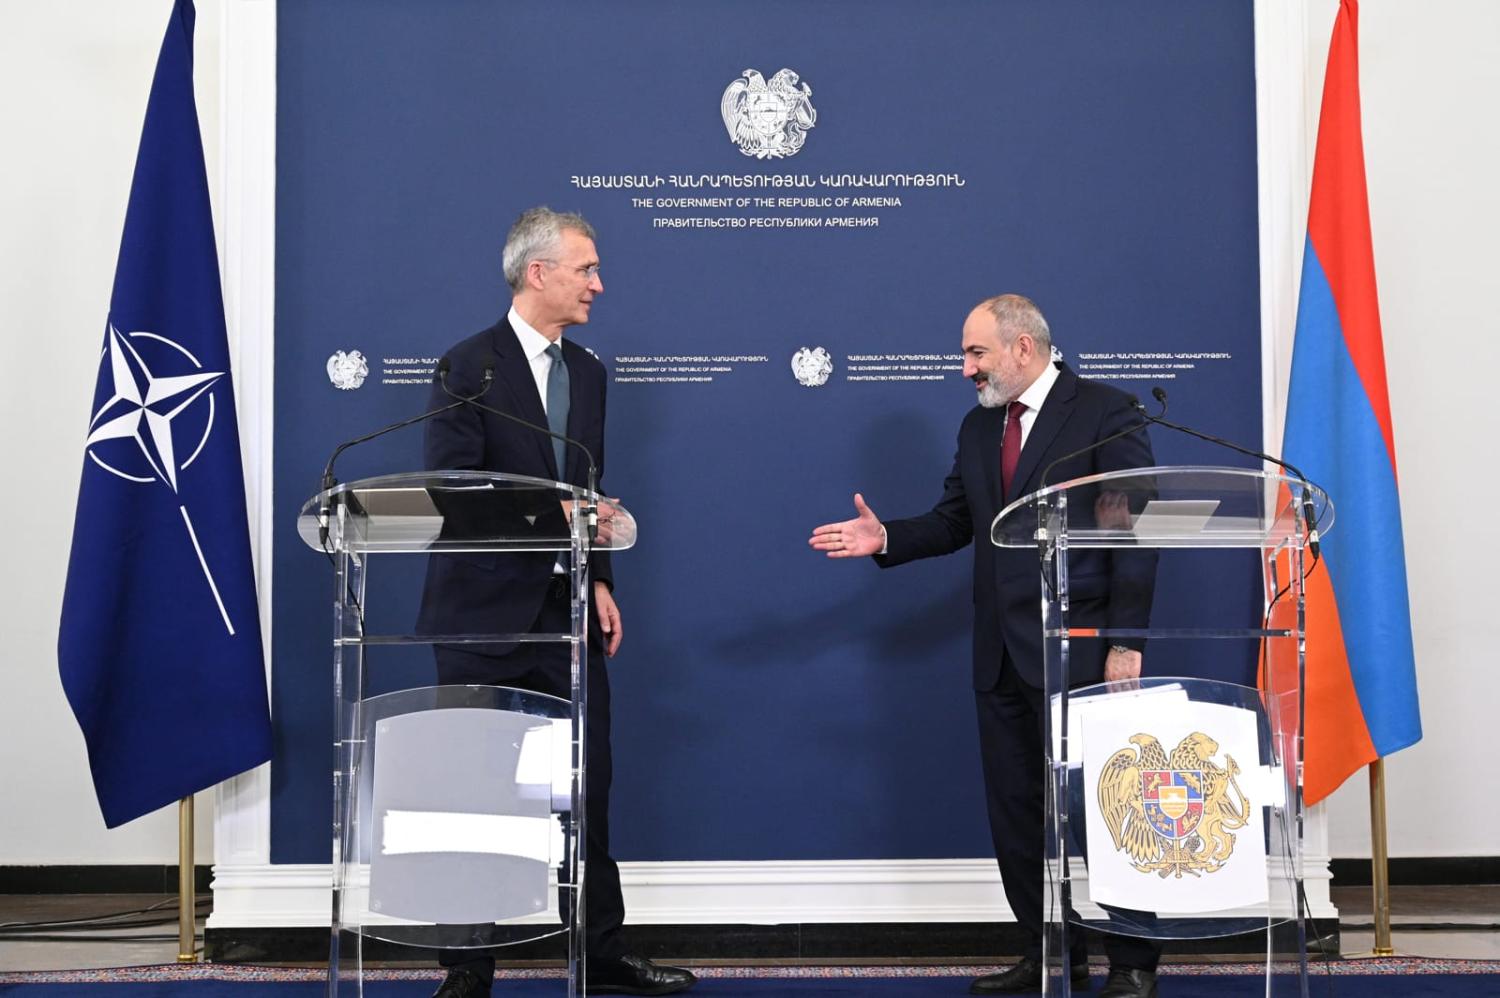 Armenian Prime Minister Nikol Pashinyan, right, and NATO Secretary General Jens Stoltenberg at a joint press conference in Yerevan last month (Karen Minasyan/AFP via Getty Images)